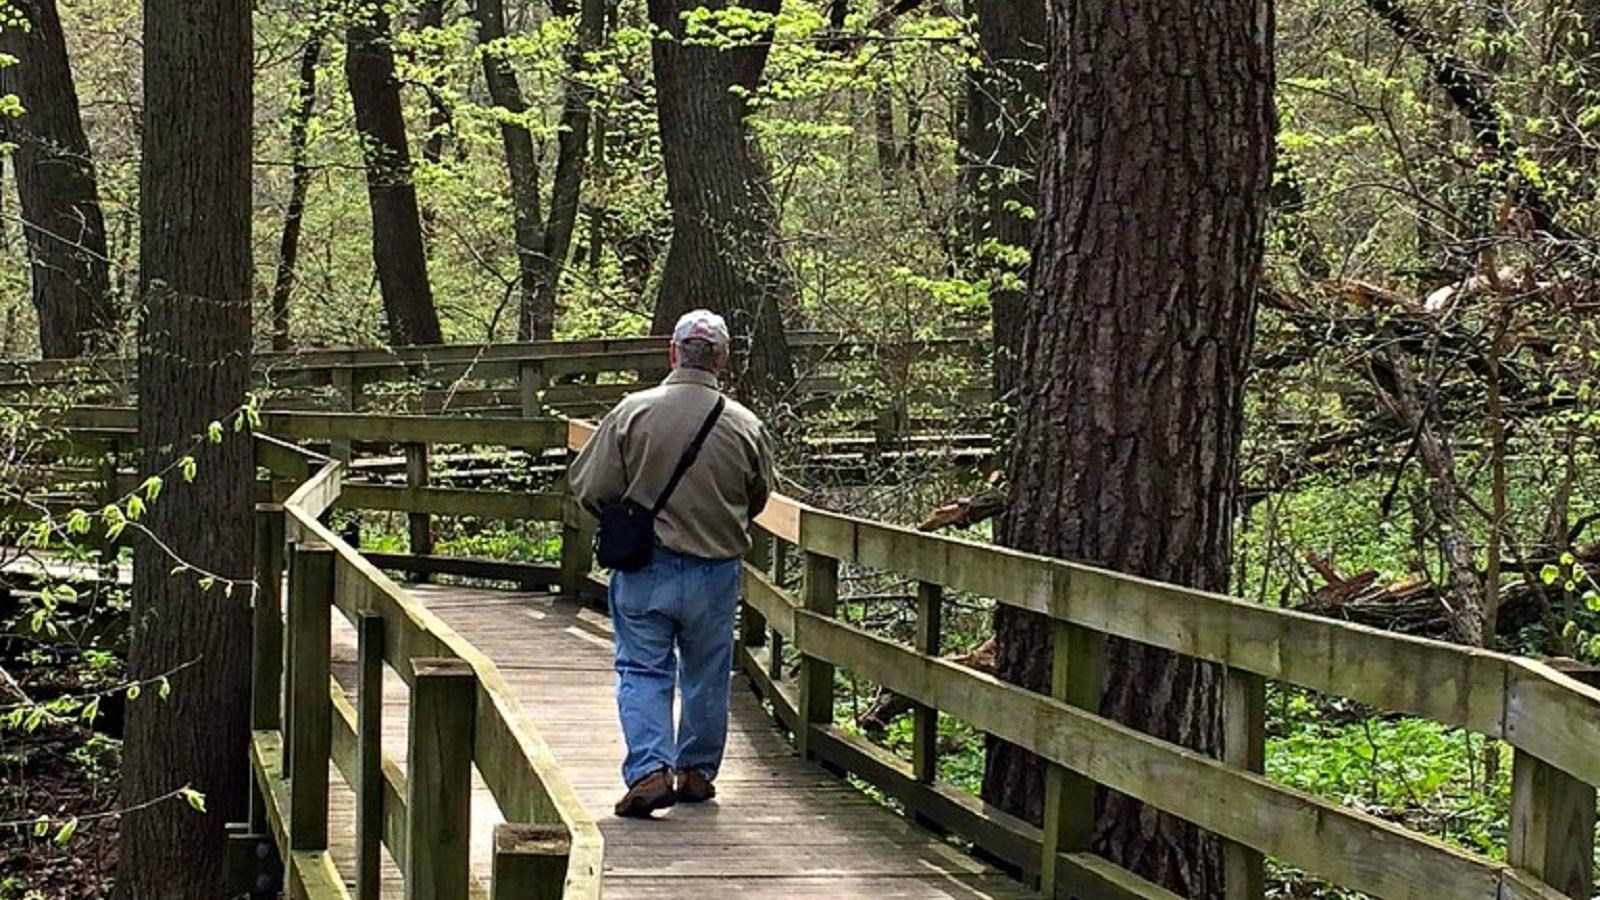 A man walks along a planked boardwalk winding through thick forest